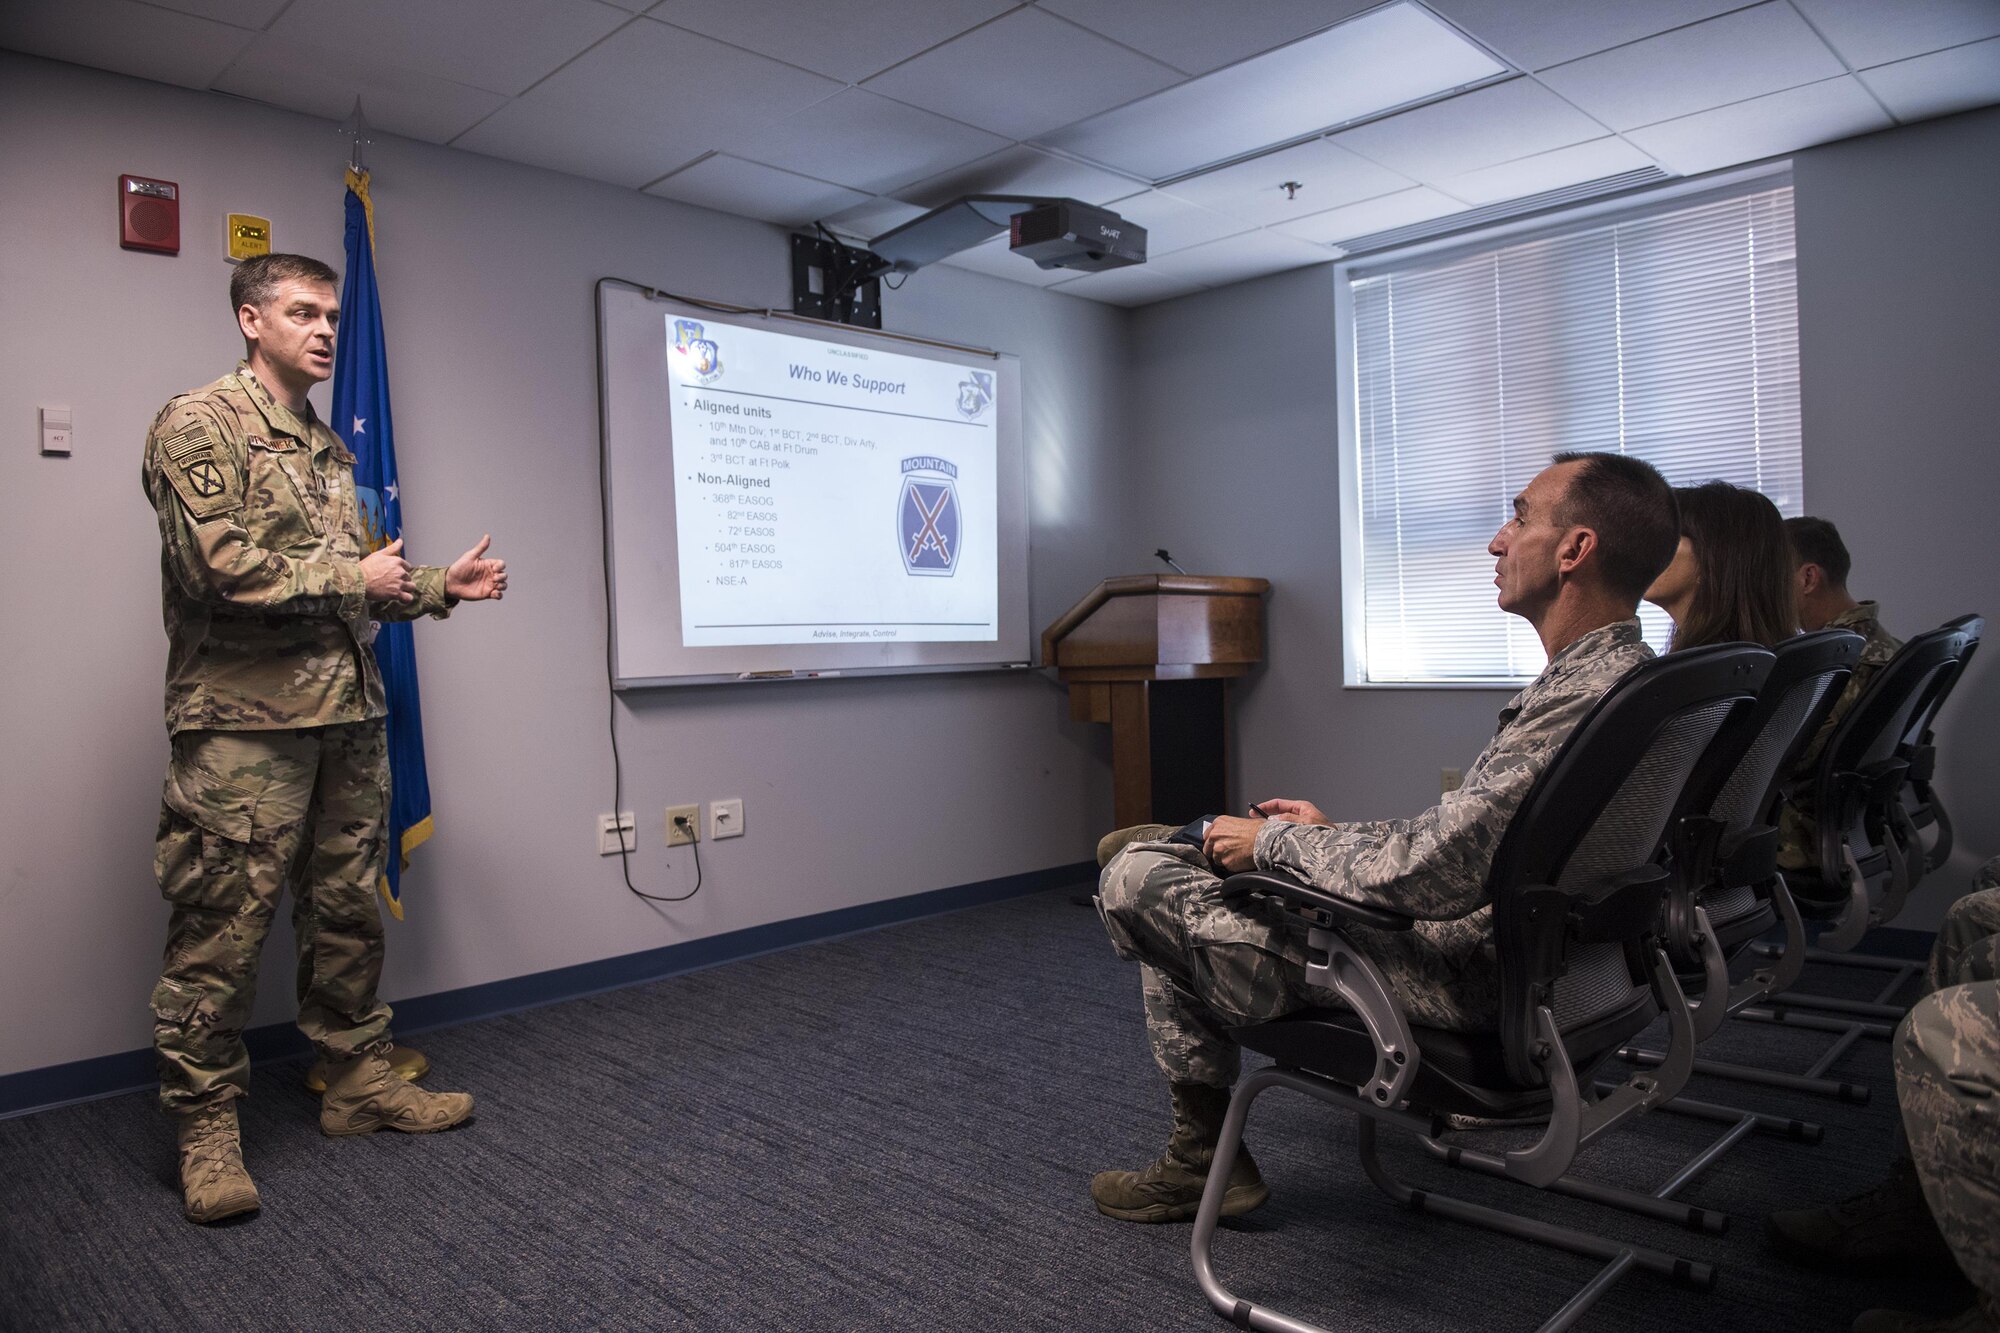 U.S. Air Force Lt. Col. Richard Fournier, 20th Air Support Operations Squadron (20th ASOS) commander, briefs Maj. Gen. Scott J. Zobrist, 9th Air Force commander, on the 20th ASOS’s mission, Oct. 10, 2017, at Fort Drum, N.Y. Airmen spoke to Zobrist about the challenges and successes they’ve had while assigned to an Air Force squadron on an Army installation, and gave him a tour of the facility. The 20th ASOS advises the U.S. Army’s 10th Mountain Division (Light Infantry) on all aspects of air operations on the battlefield and integrate airpower into the Army scheme of maneuver. (U.S. Air Force photo by Senior Airman Janiqua P. Robinson)